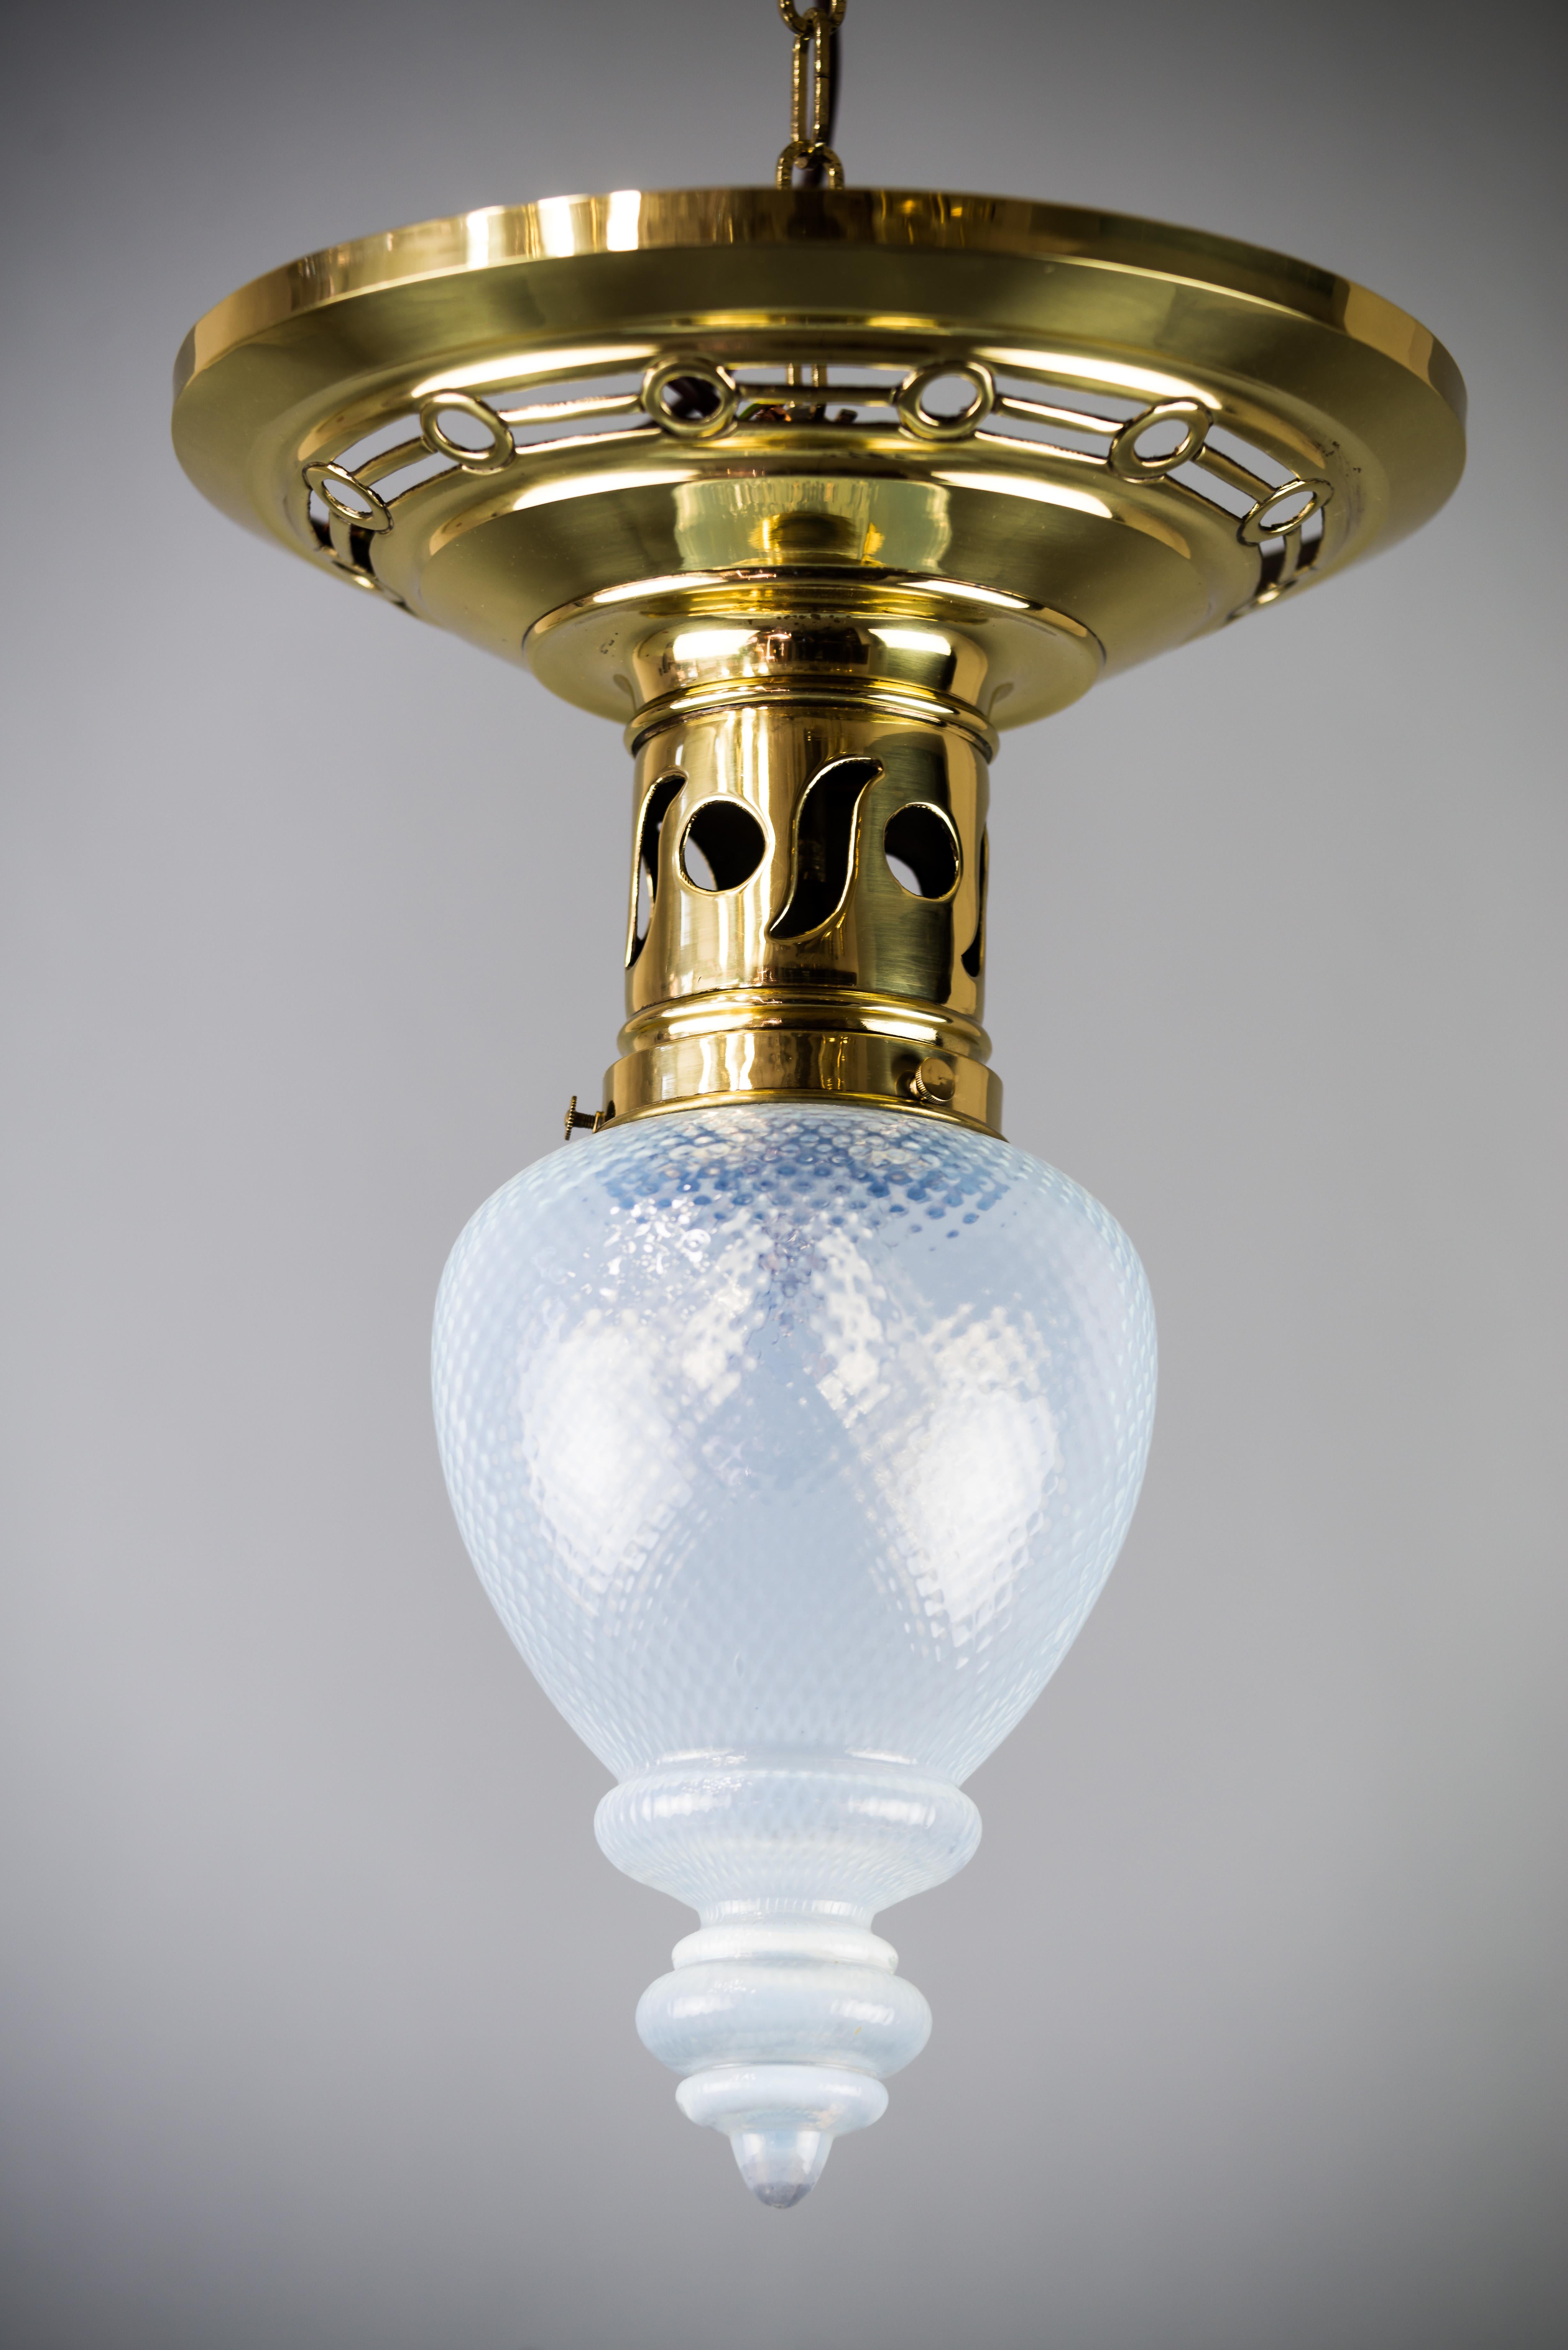 Early 20th Century Jugendstil Ceiling Lamp circa 1908 with Original Opaline Glass Shade